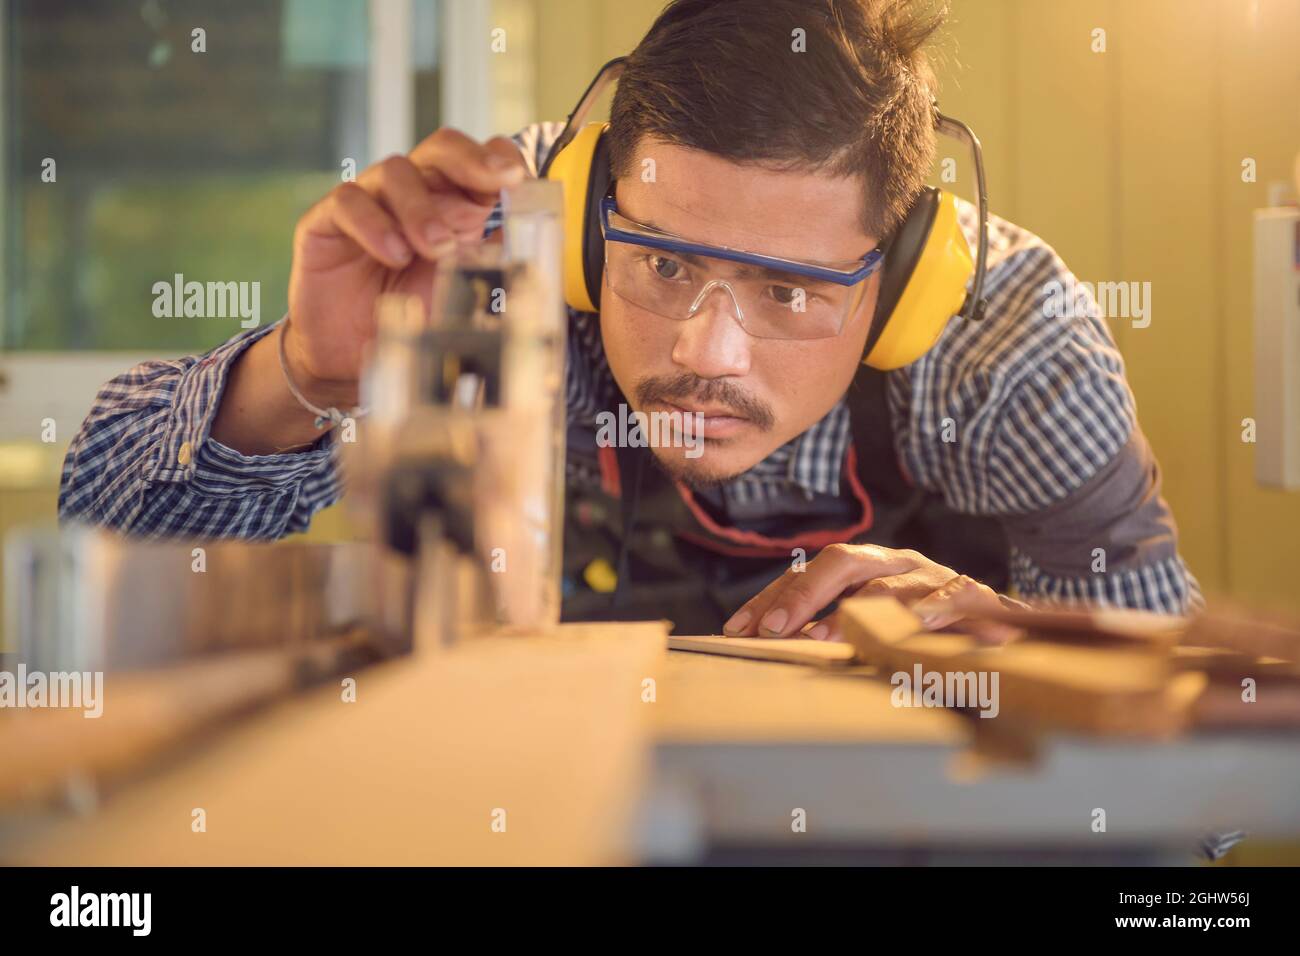 Portrait of a carpenter using a circular saw in a workshop, Thailand Stock Photo